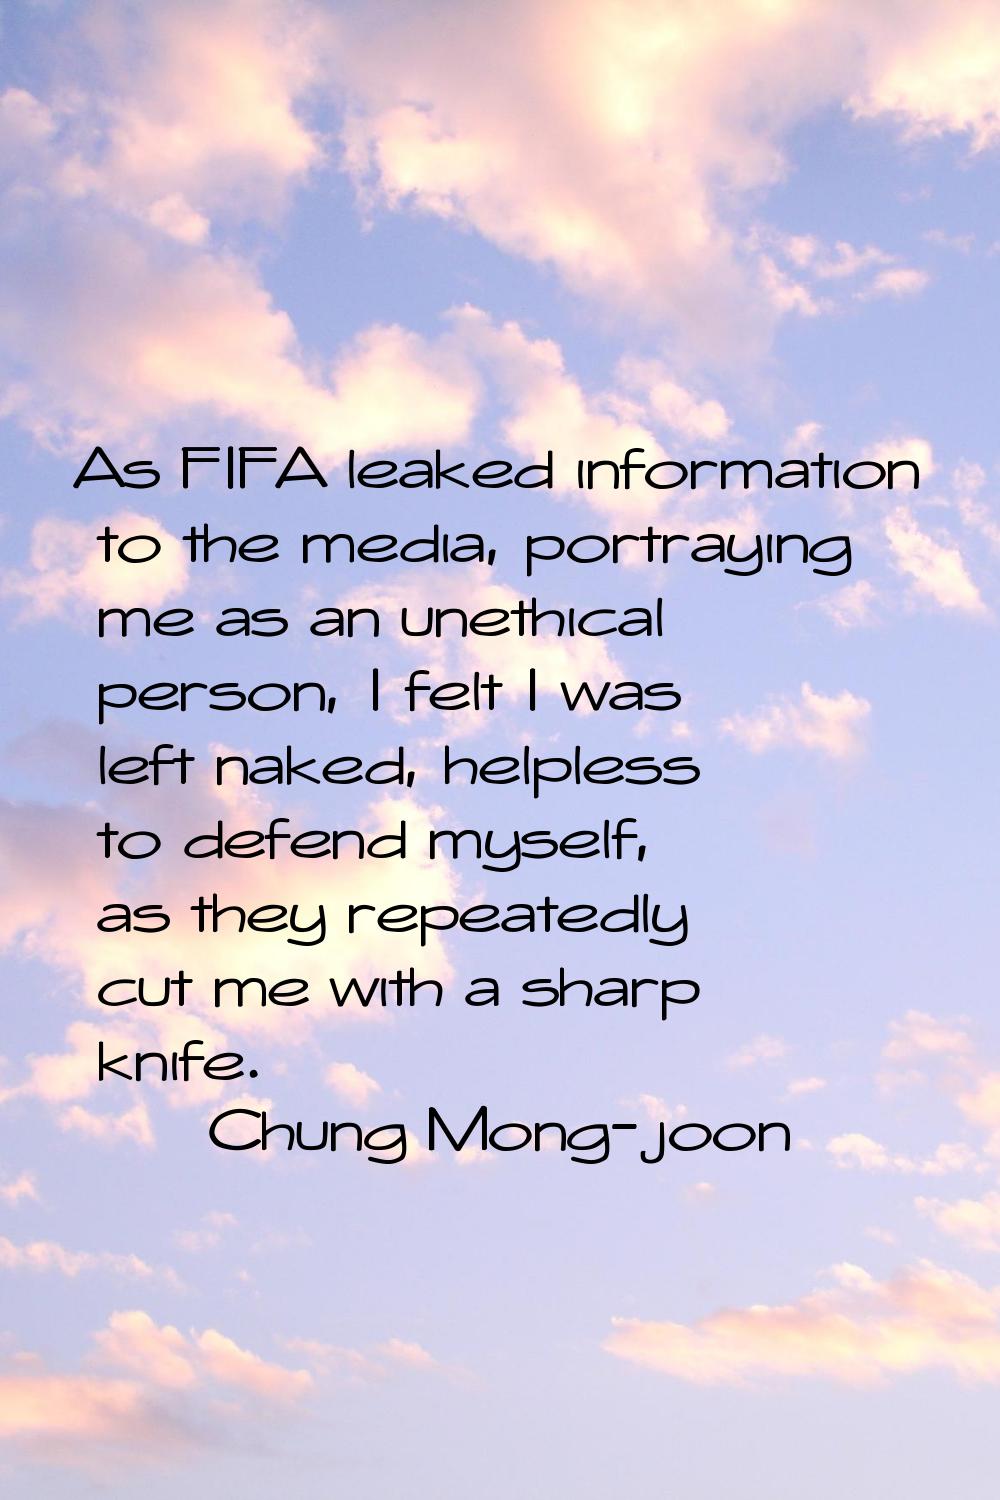 As FIFA leaked information to the media, portraying me as an unethical person, I felt I was left na